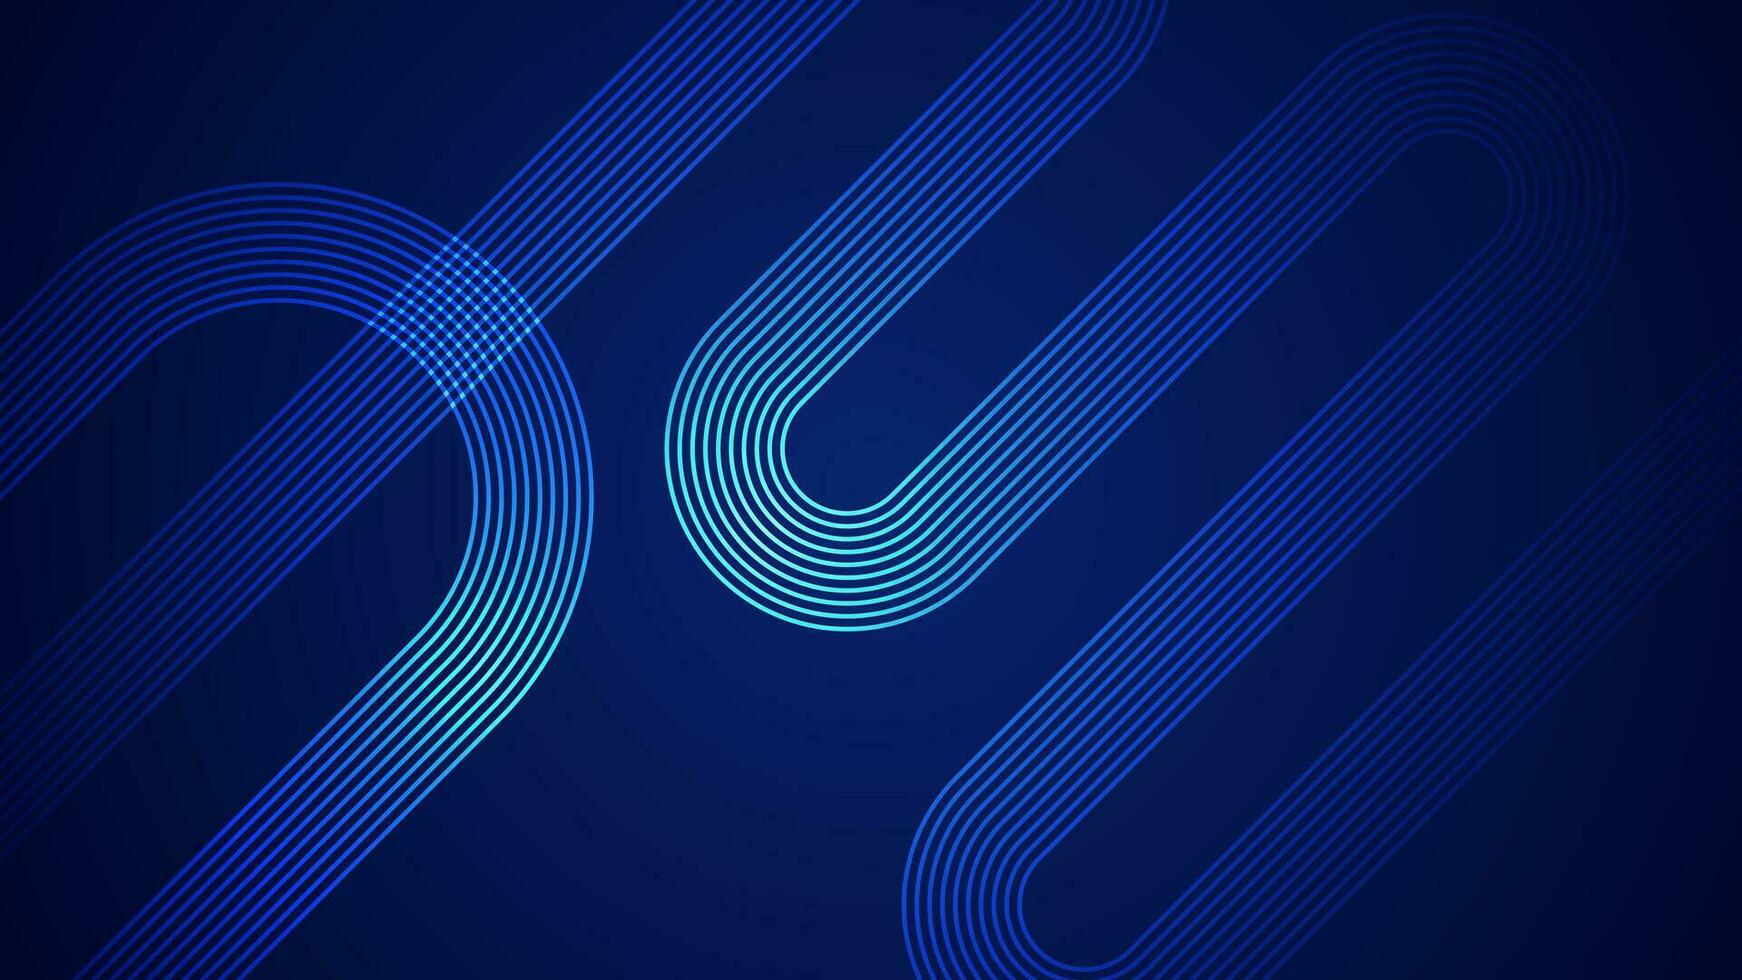 Dark blue abstract background with serpentine style lines as the main component. vector